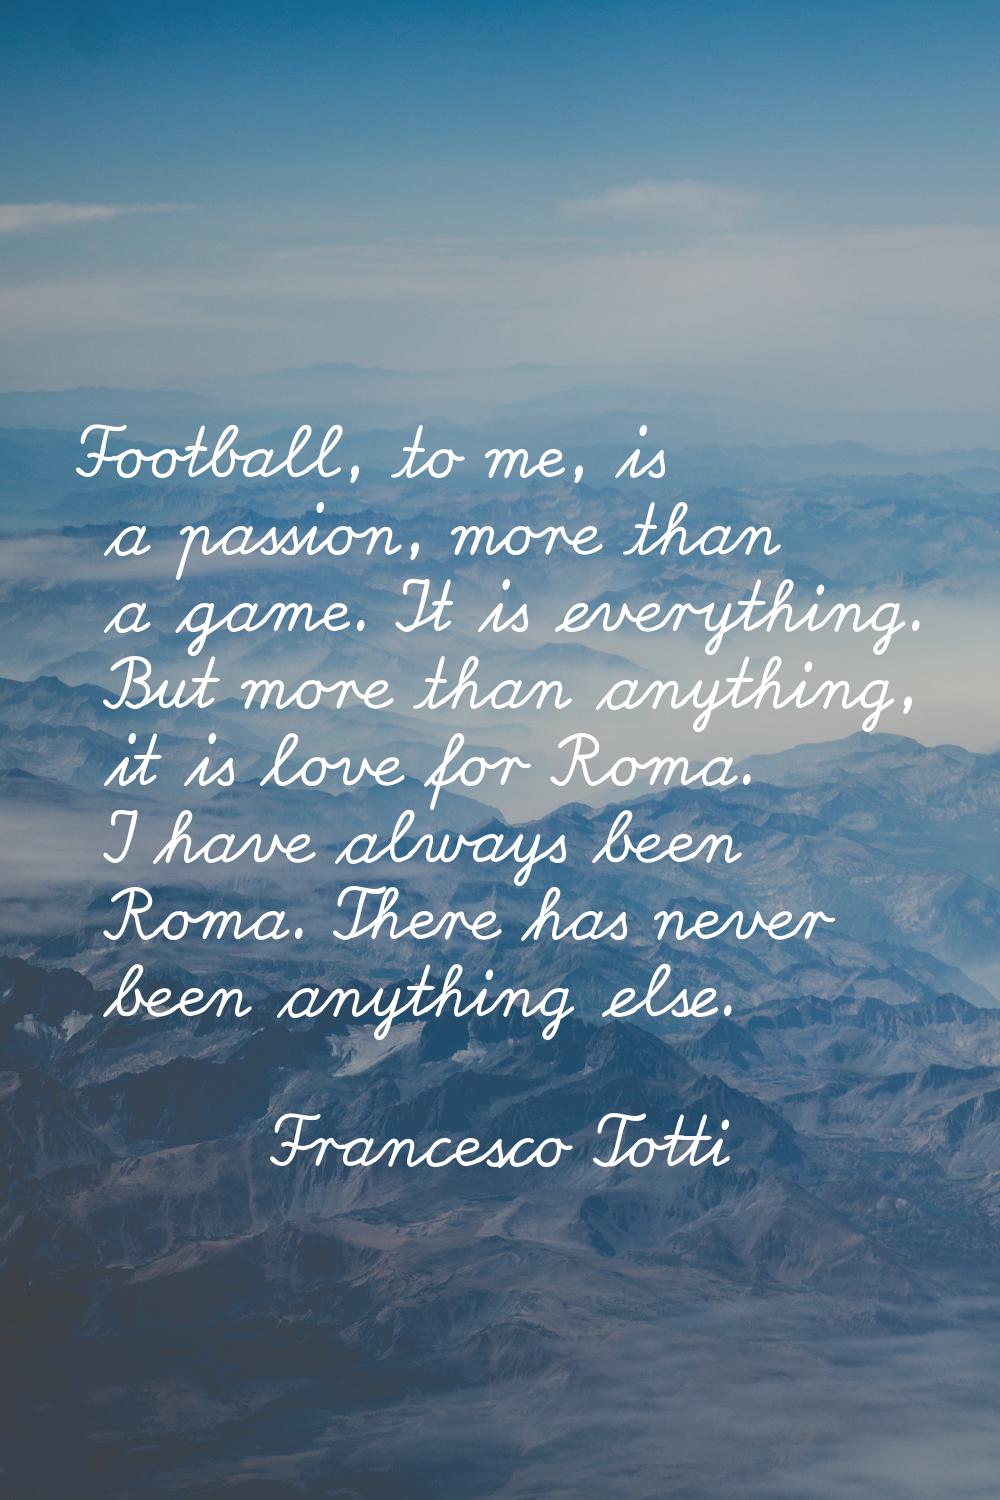 Football, to me, is a passion, more than a game. It is everything. But more than anything, it is lo